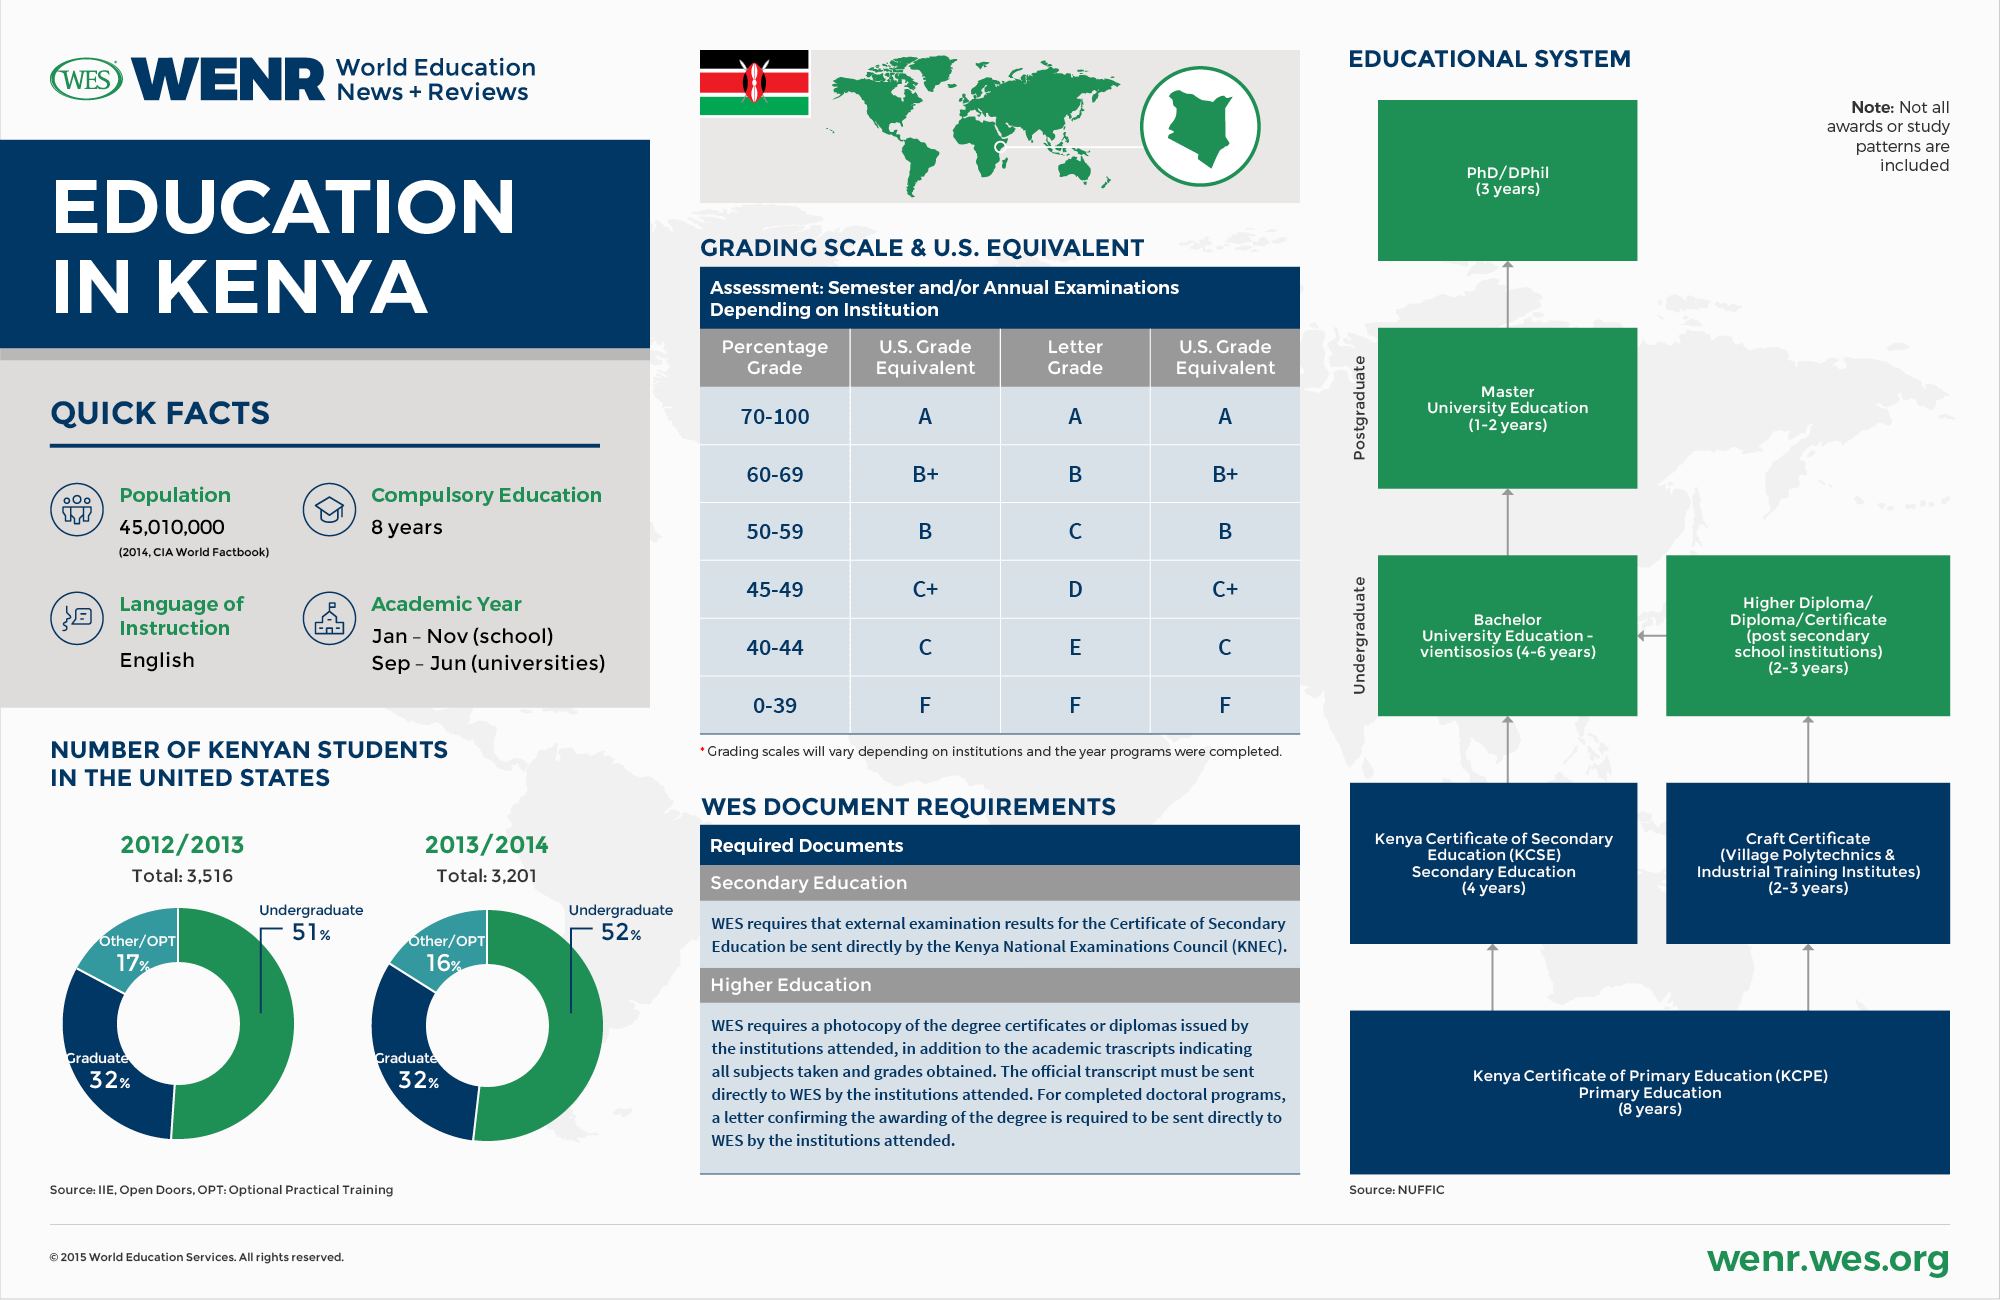 An infographic with fast facts about Kenya's educational system and international student mobility landscape. 